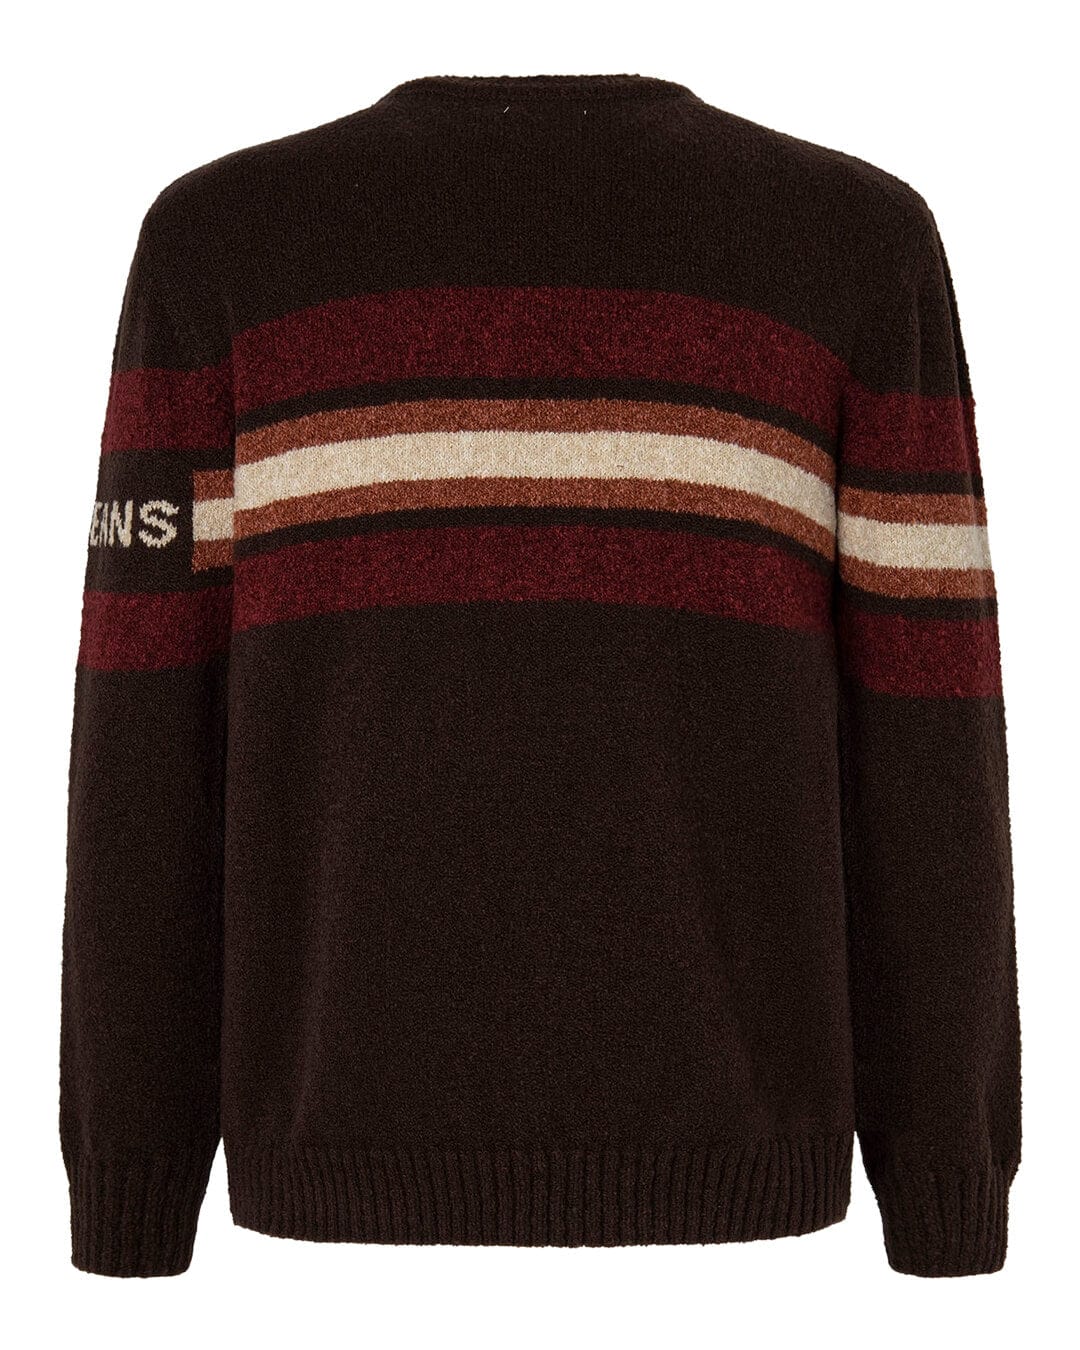 Pepe Jeans Jumpers Pepe Jeans Scott Brown Trail Jumper